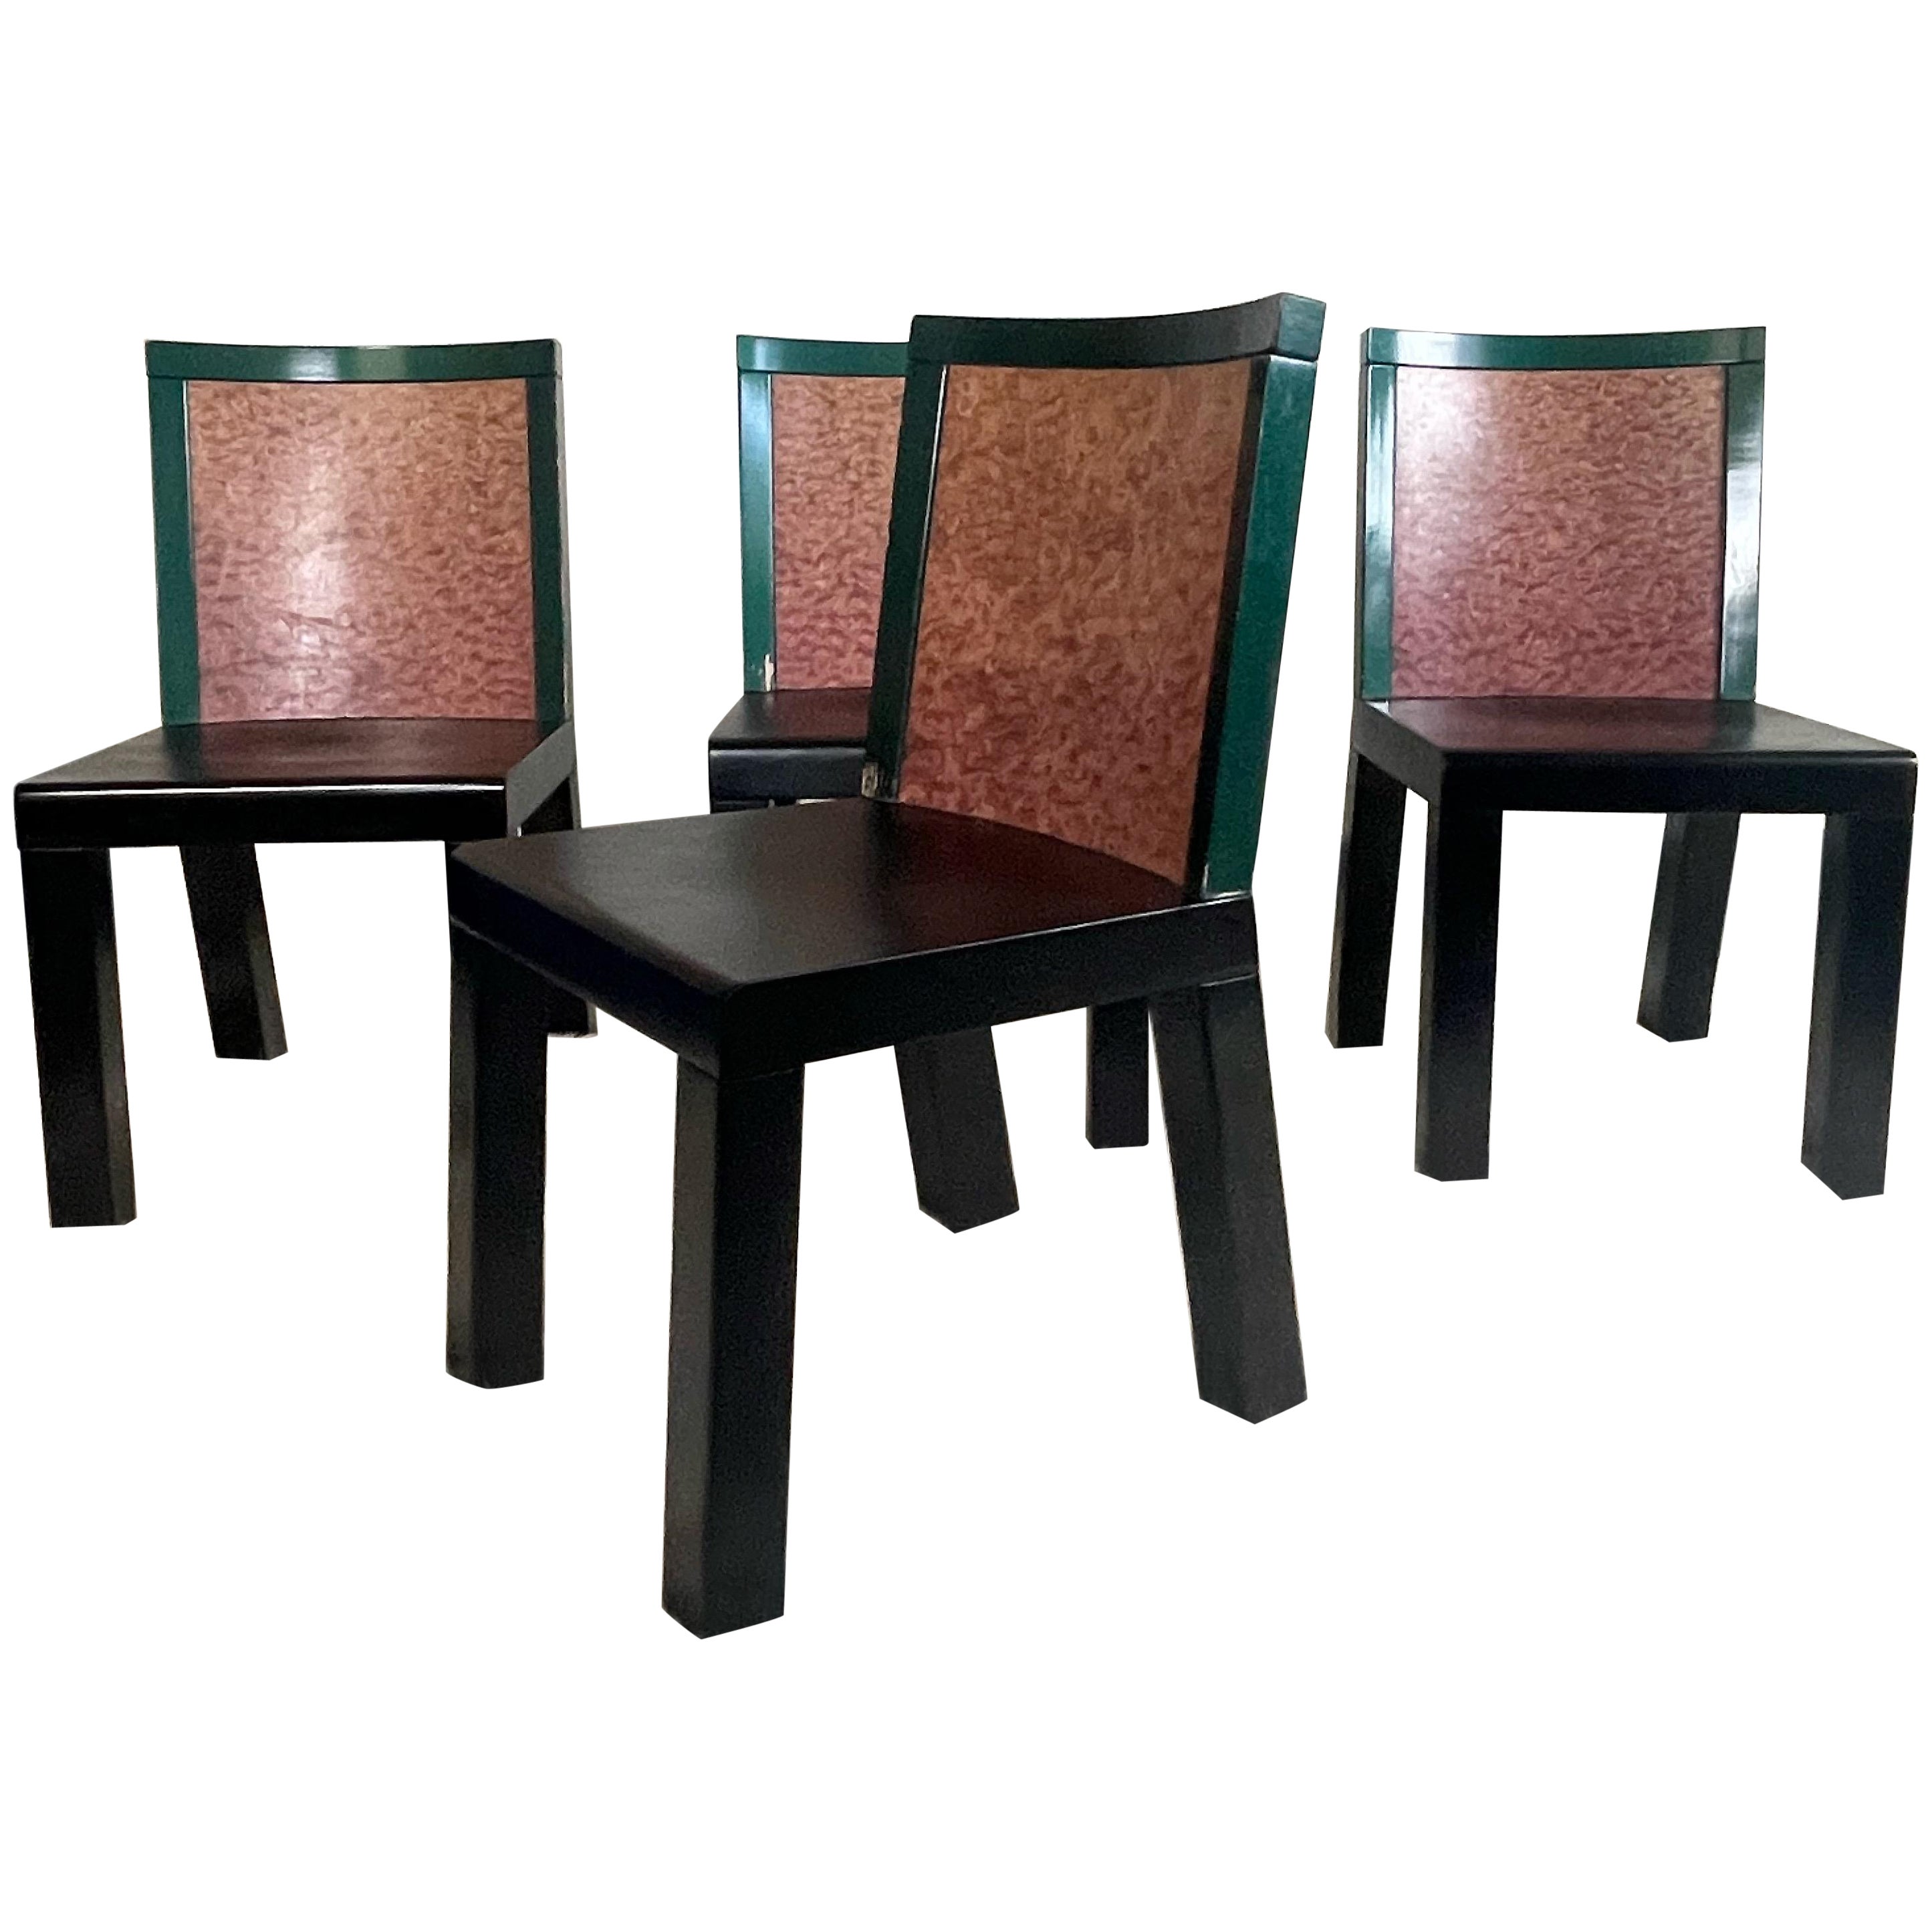 Set of Four “Donau” Dining Chairs by Ettore Sottsass and Marco Zanini. 